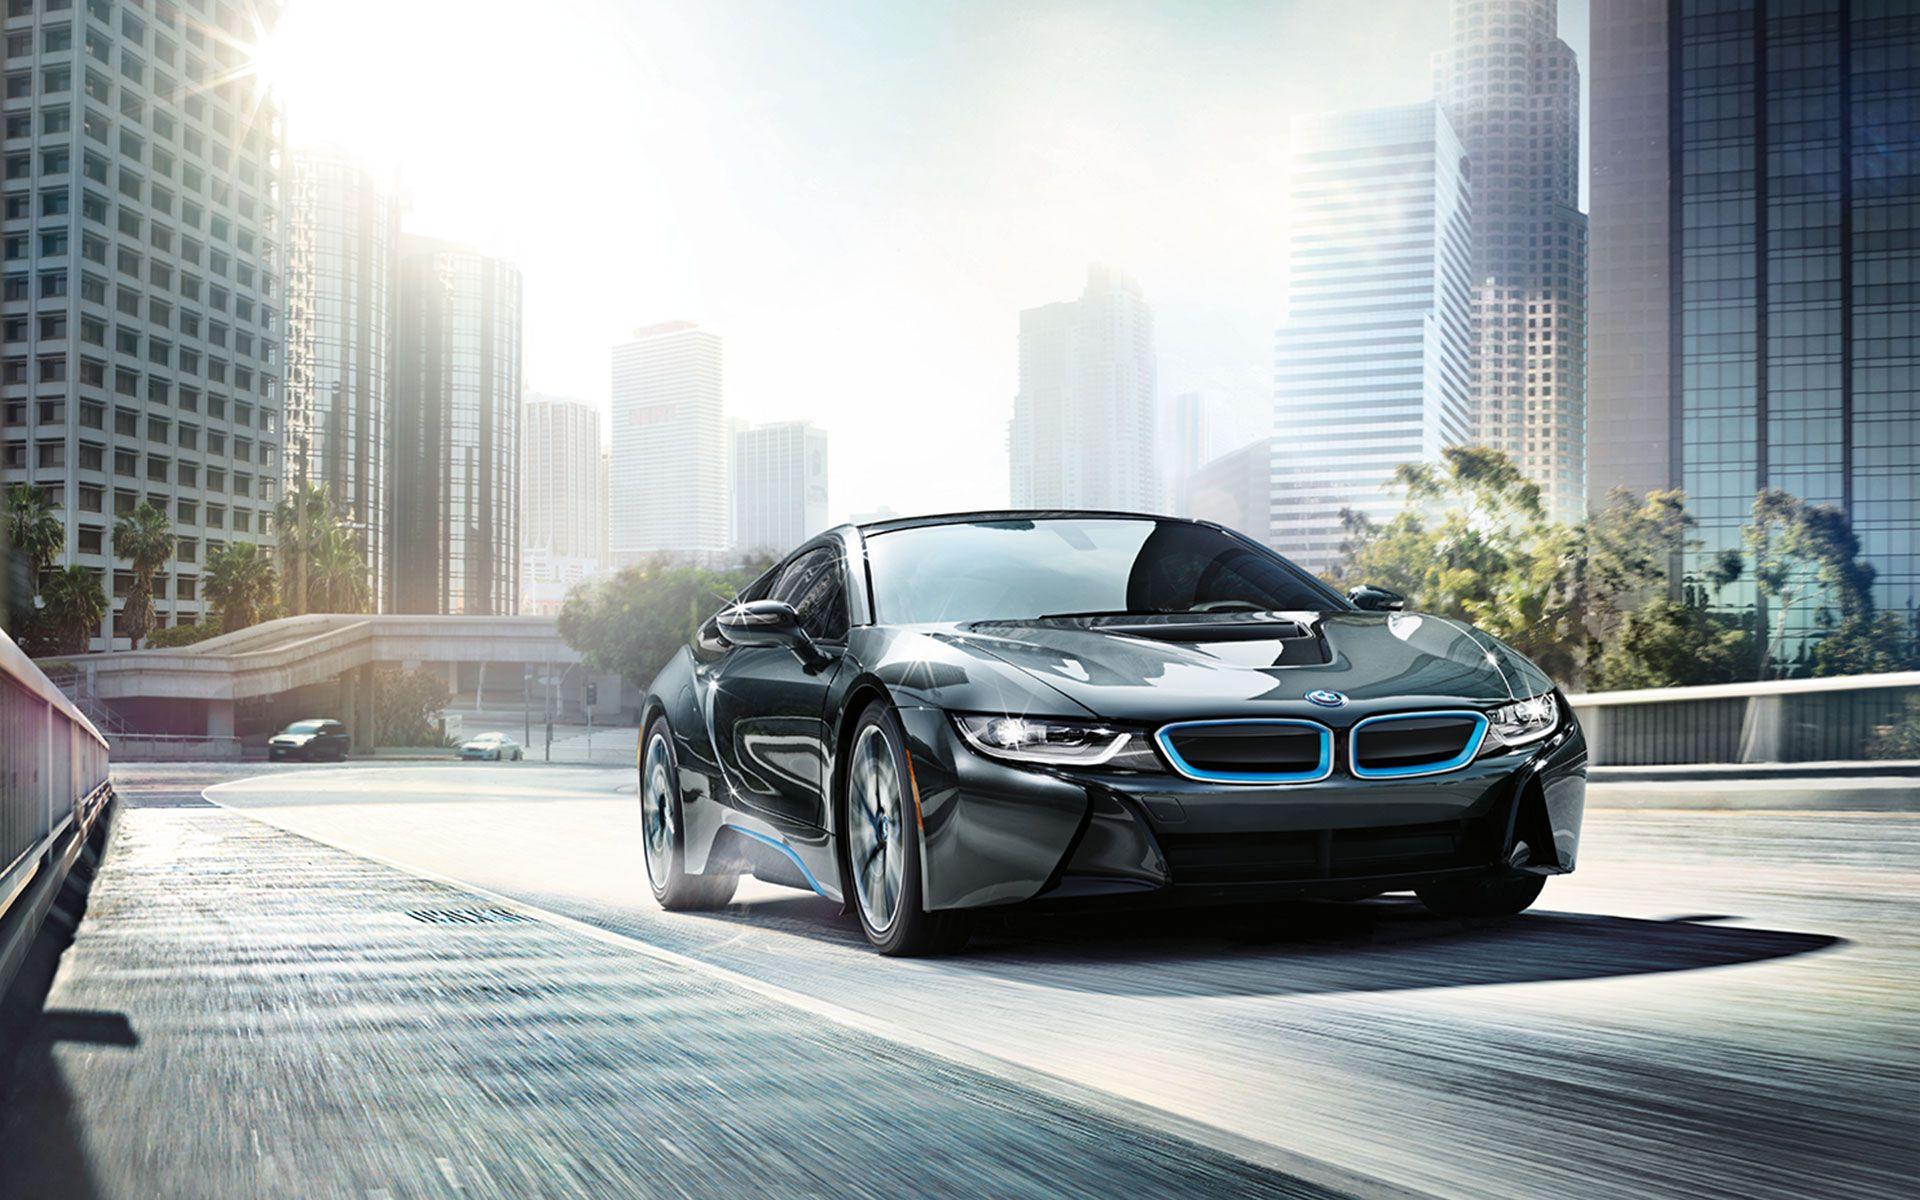 BMW i8 News and Information